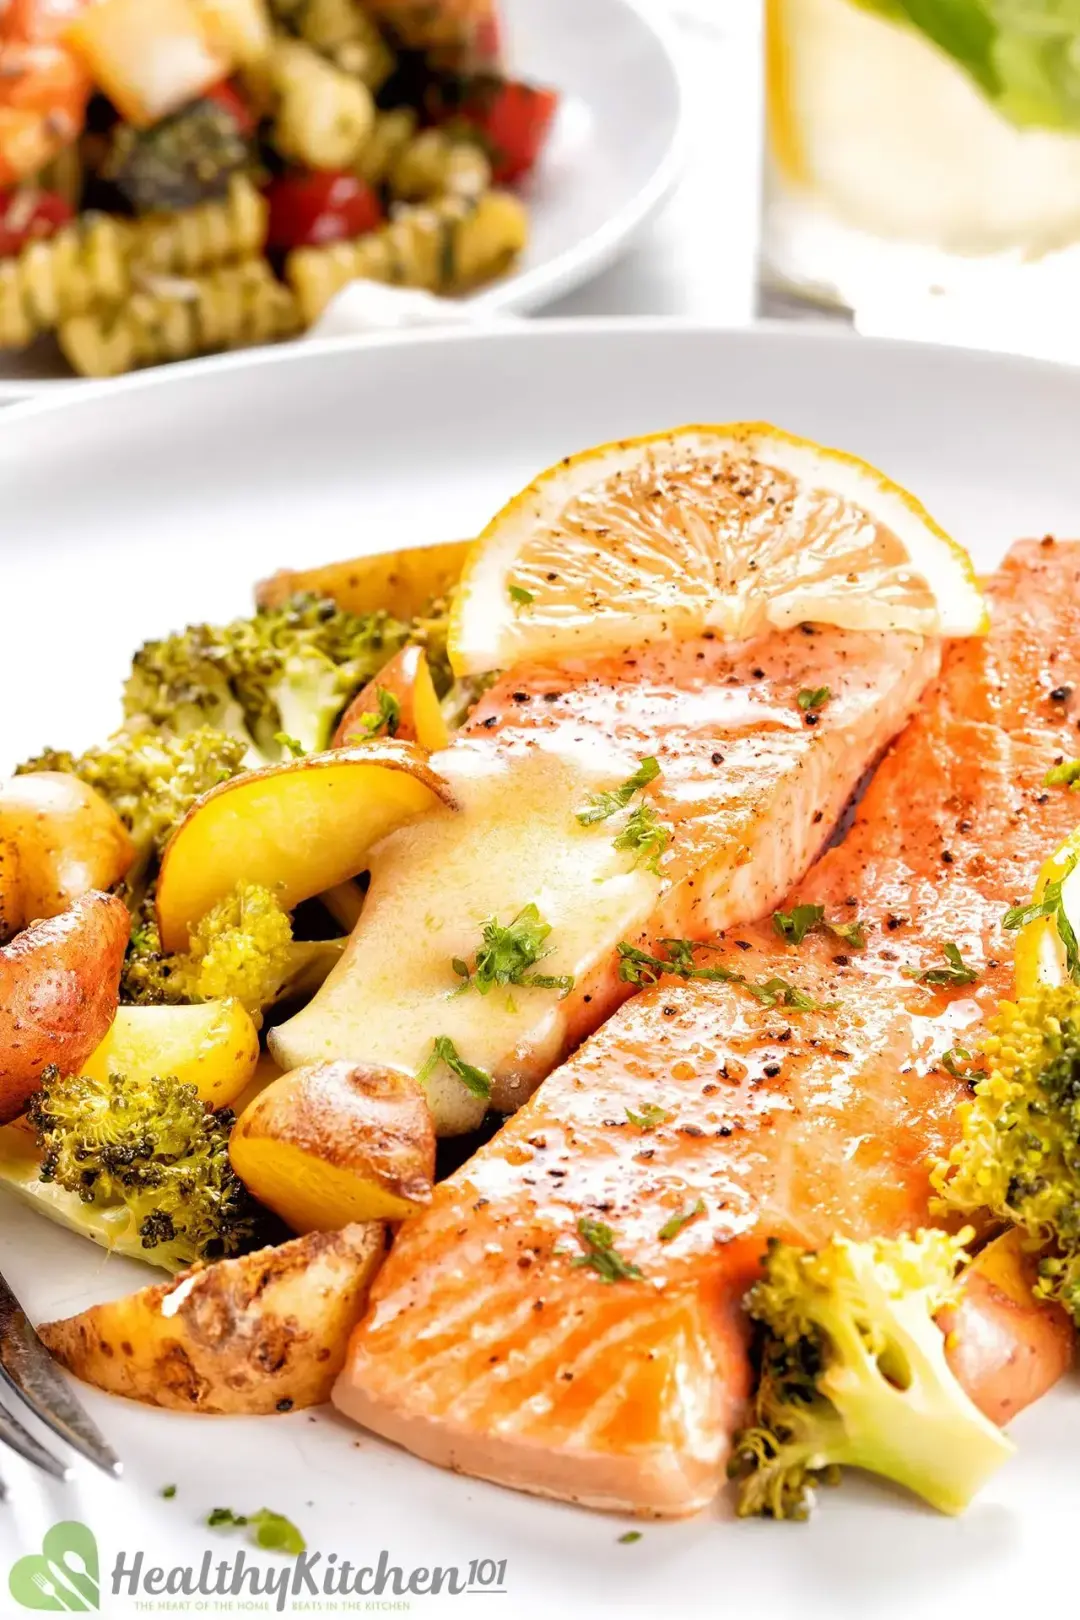 A serving plate of baked salmon, potato wedges, and broccoli, topped with a lemon slice.